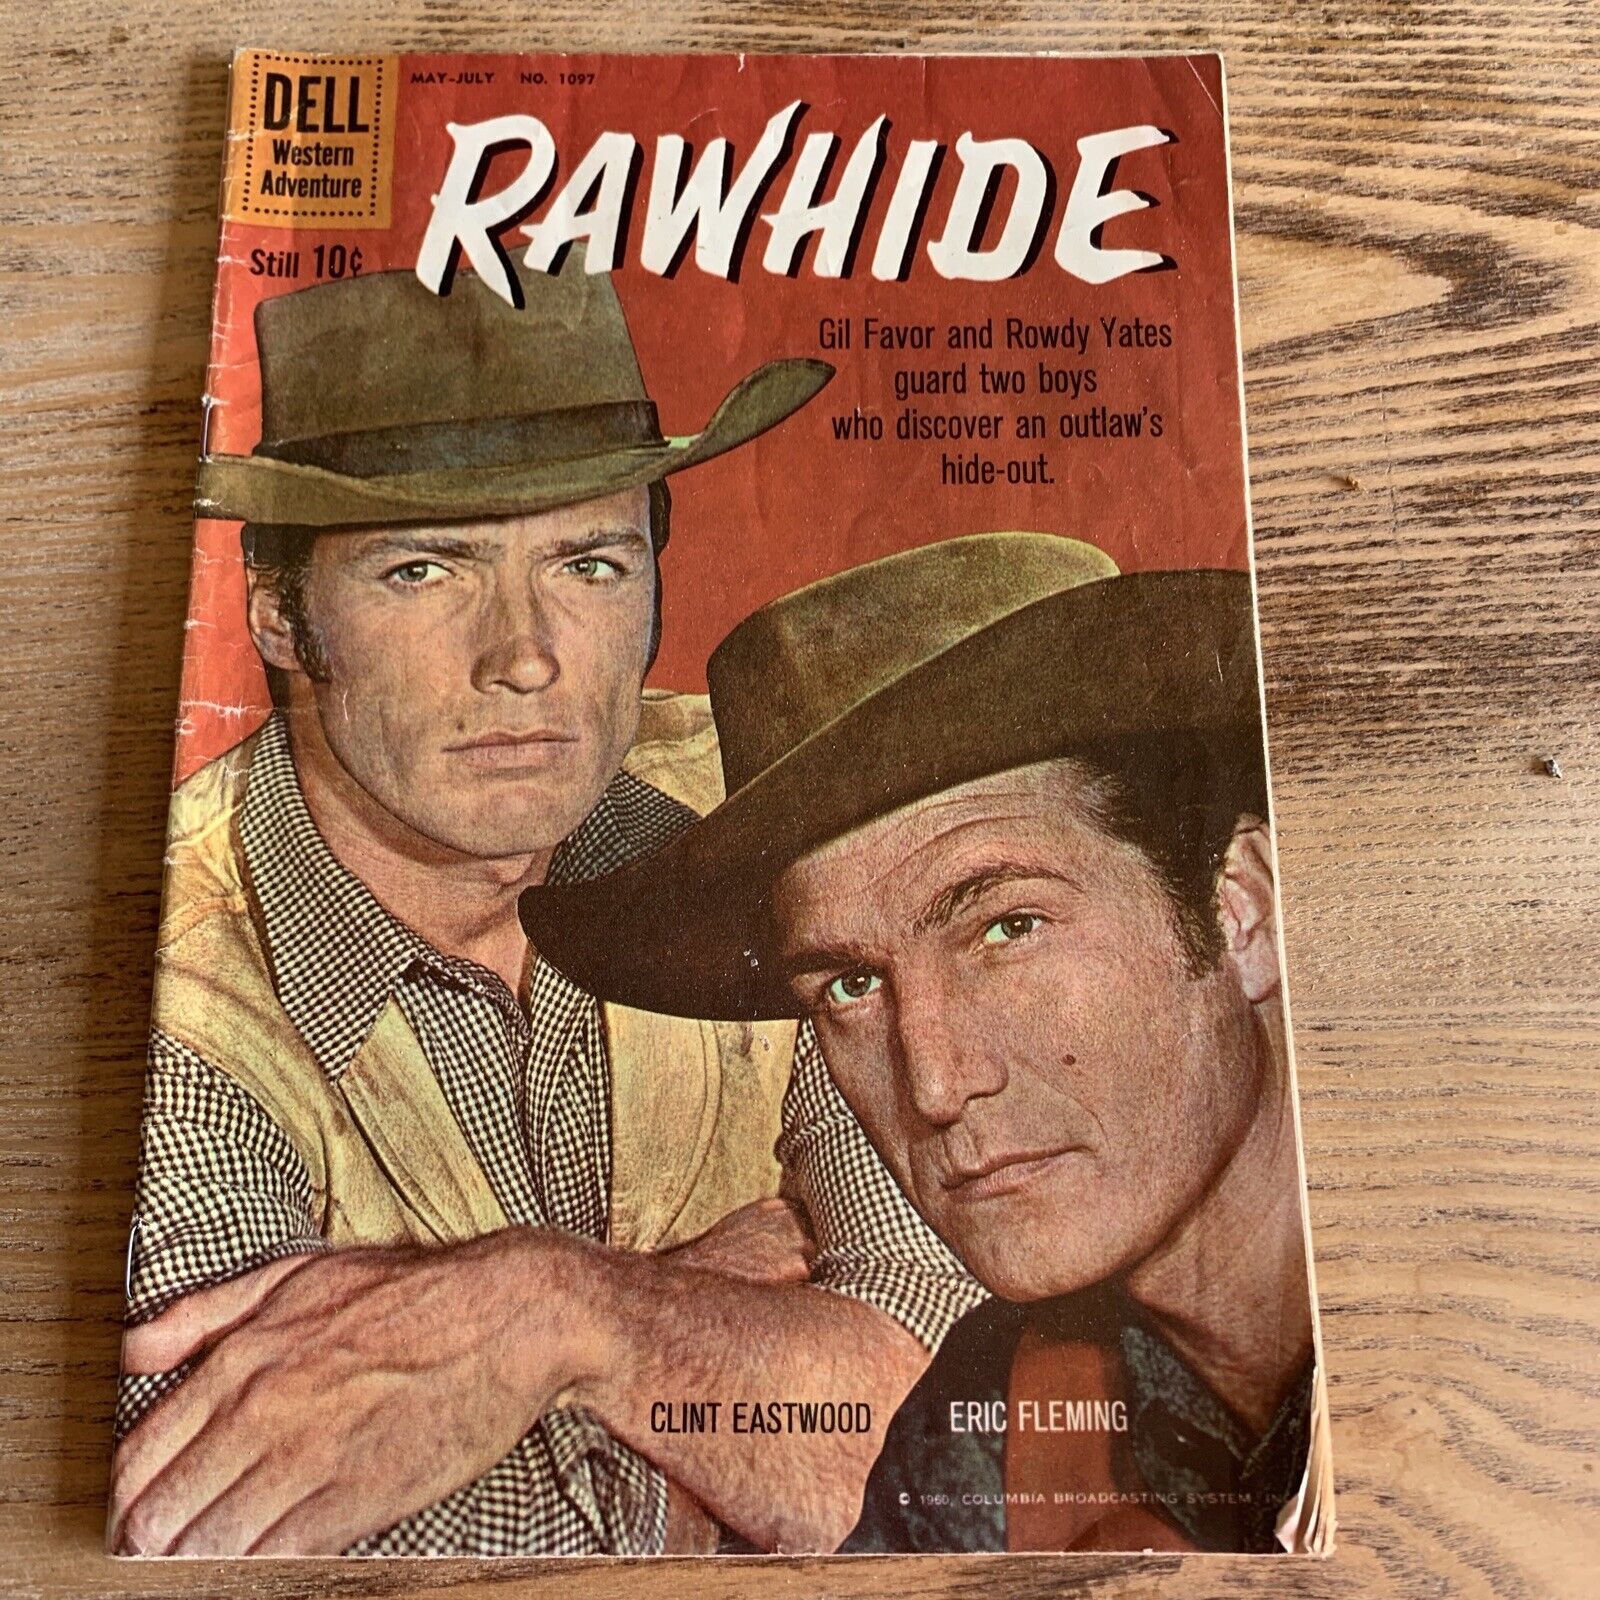 DELL Comic 1960 Rawhide Four Color #1097 May Clint Eastwood photo cover Western